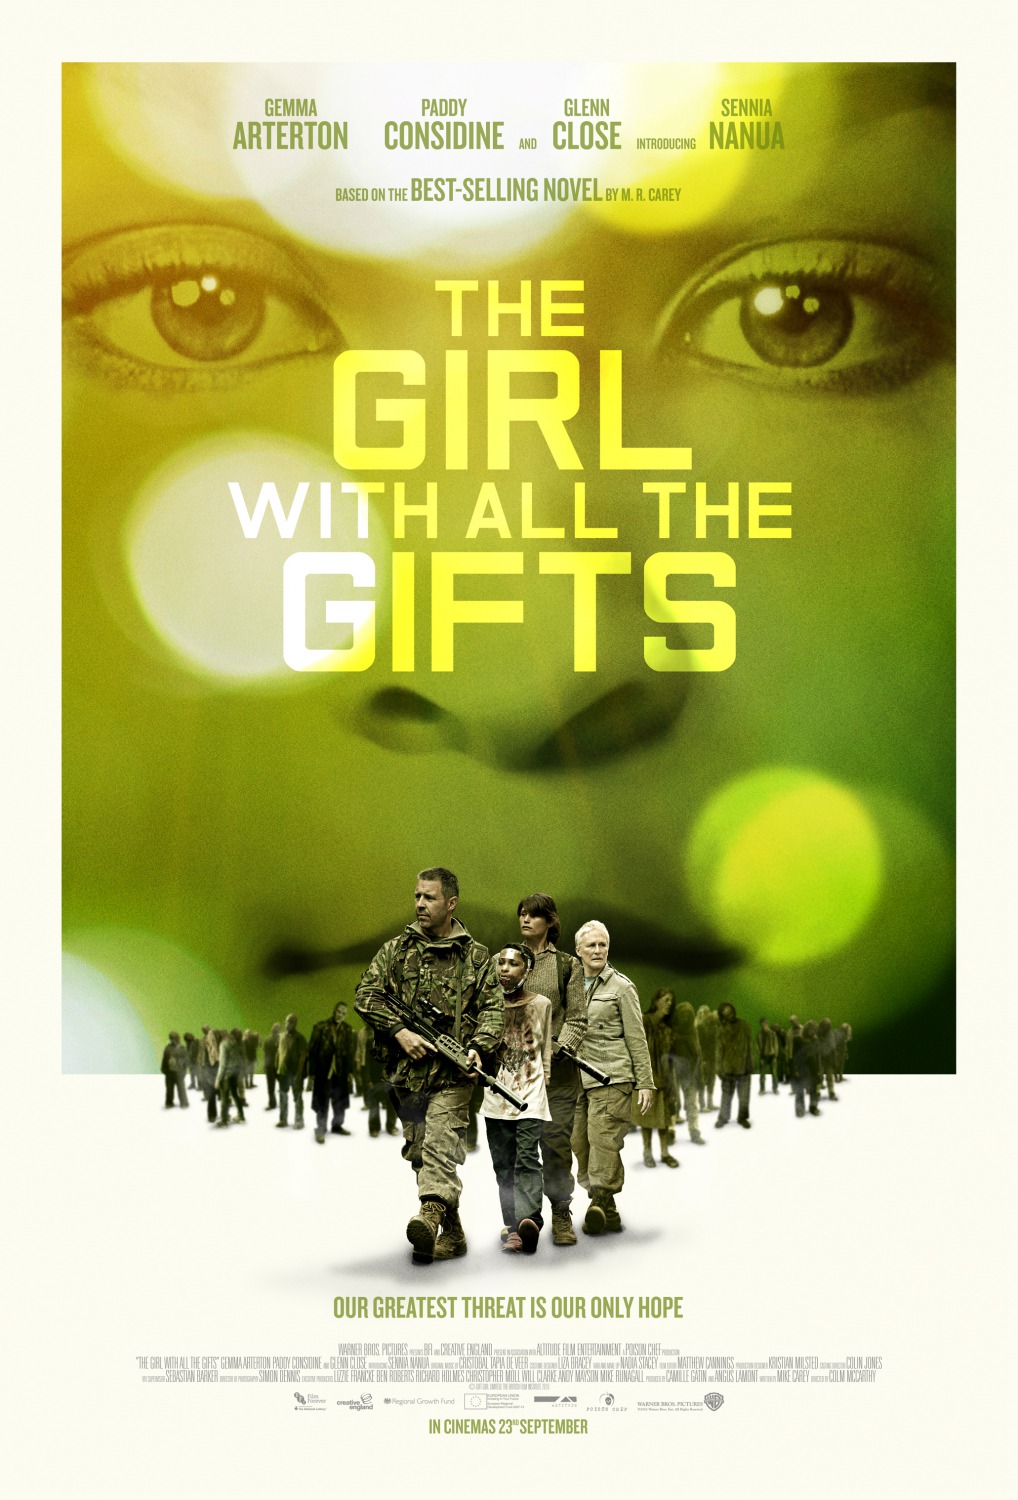 The Girl With All The Gifts film review: bleak but brilliant?